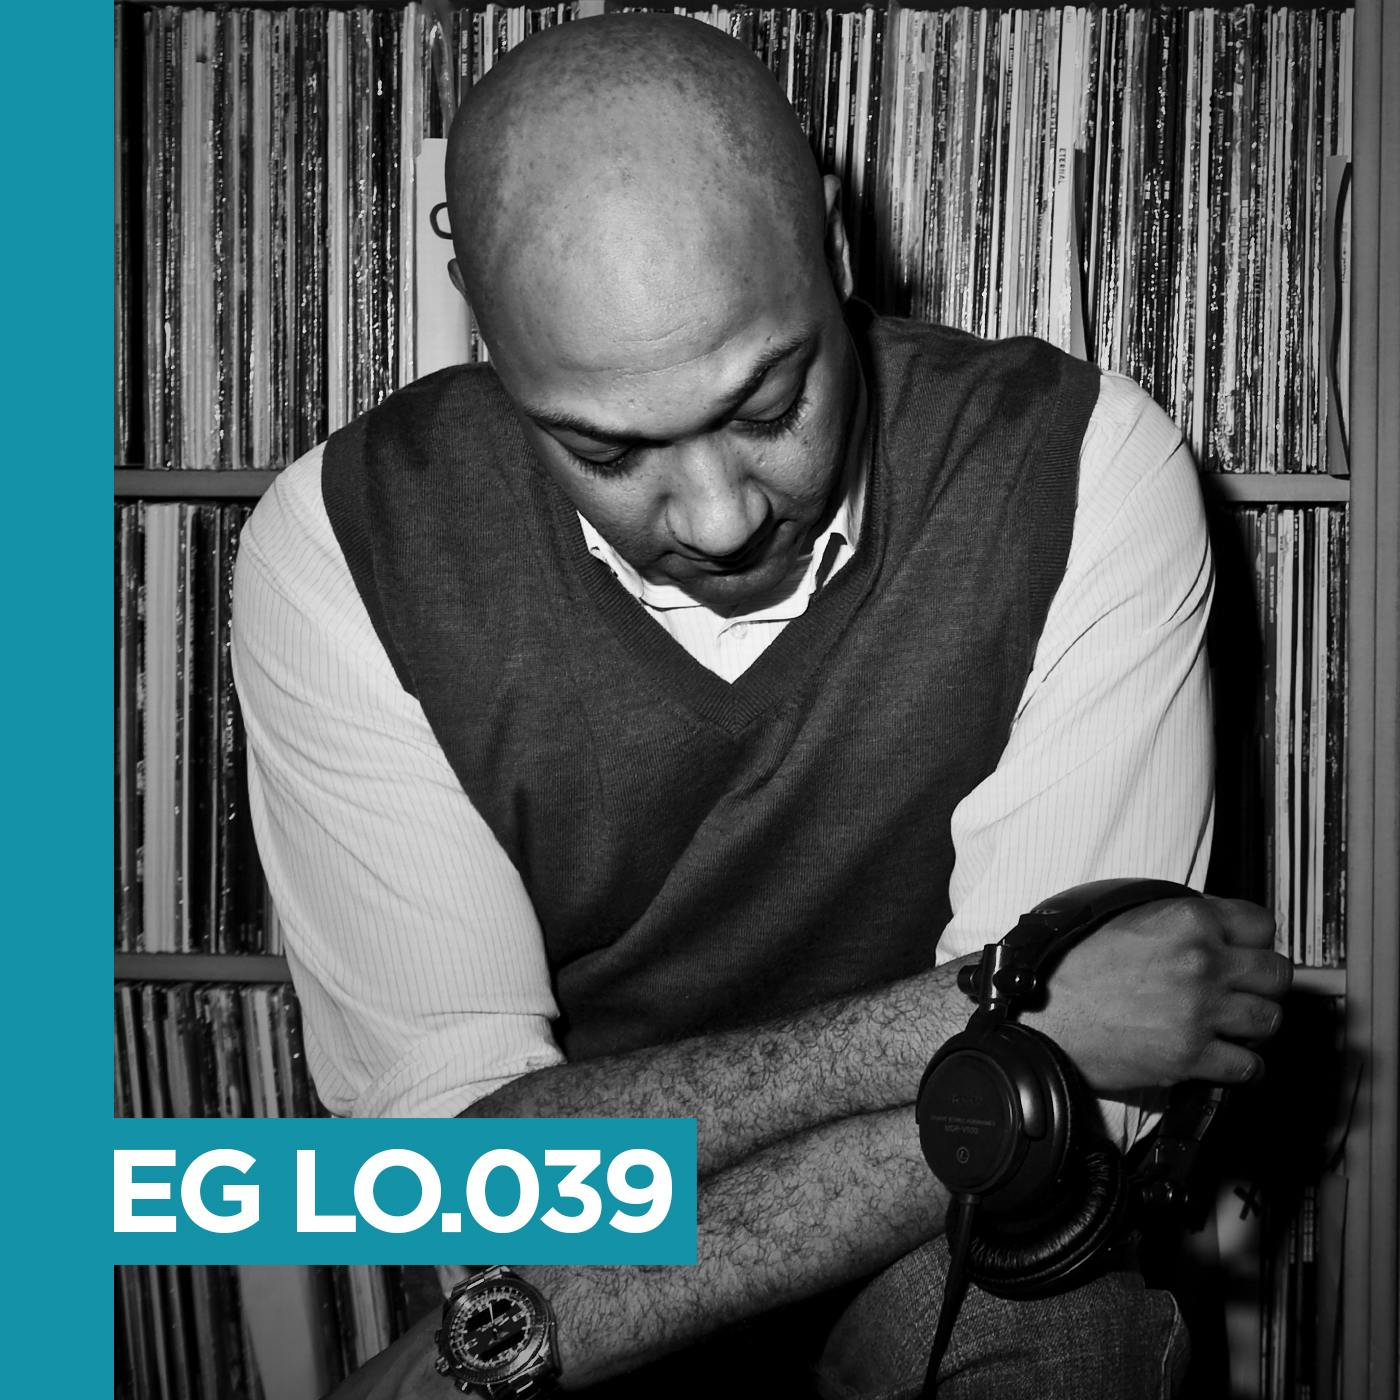 Ahead of his compilation for BBE Music, 'Ronnie Herel presents Neo Soul Sessions Vol. 1', out Friday, October 9th 2020, Ronnie Herel put together a mix for the EG LO series on Electronic Groove.